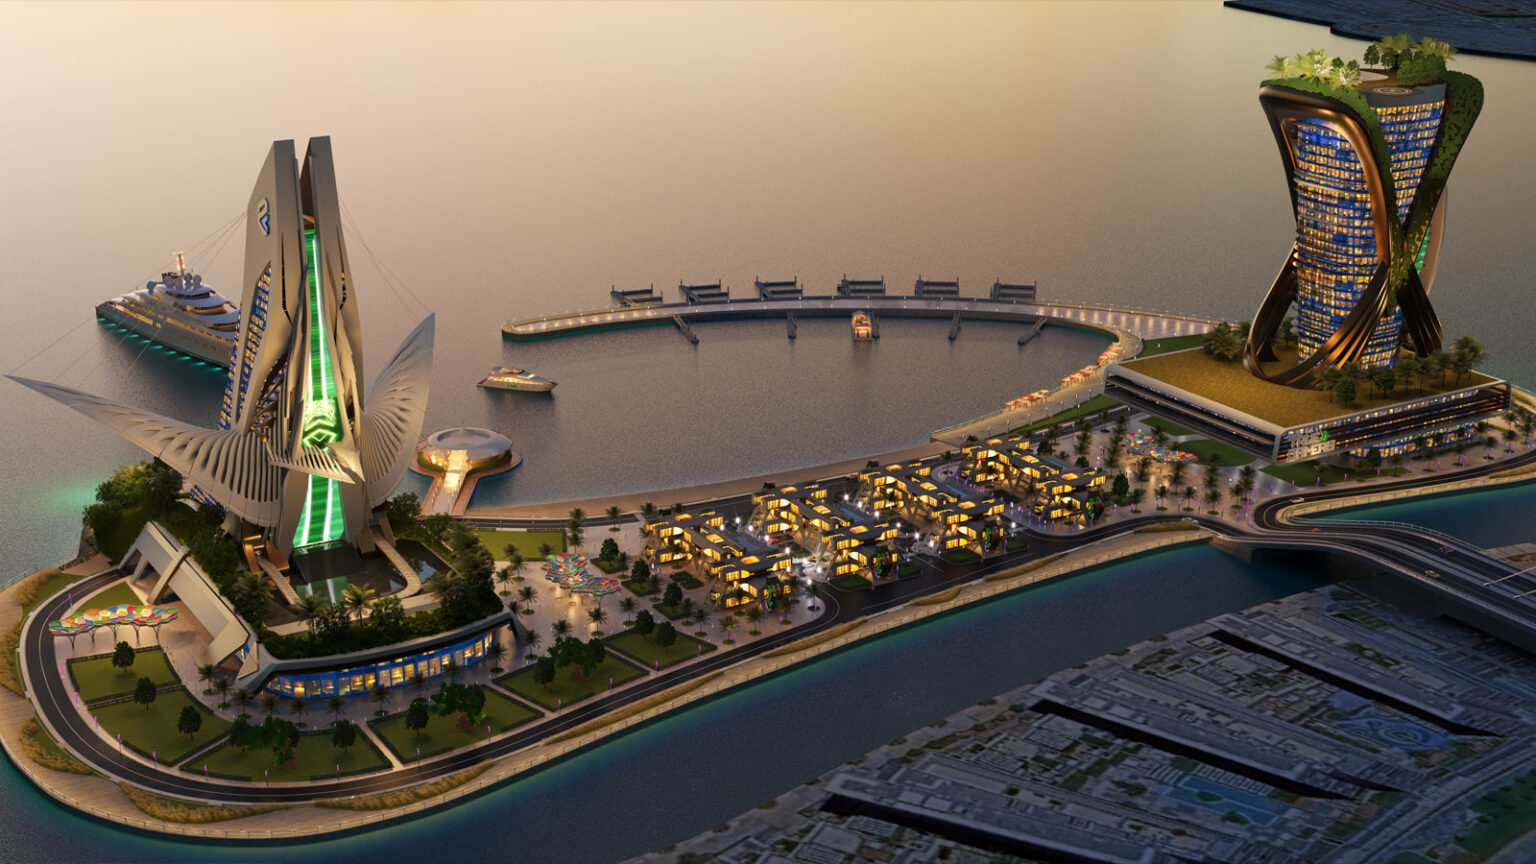 Abu Dhabi unveils plans to build the world’s first eSports island